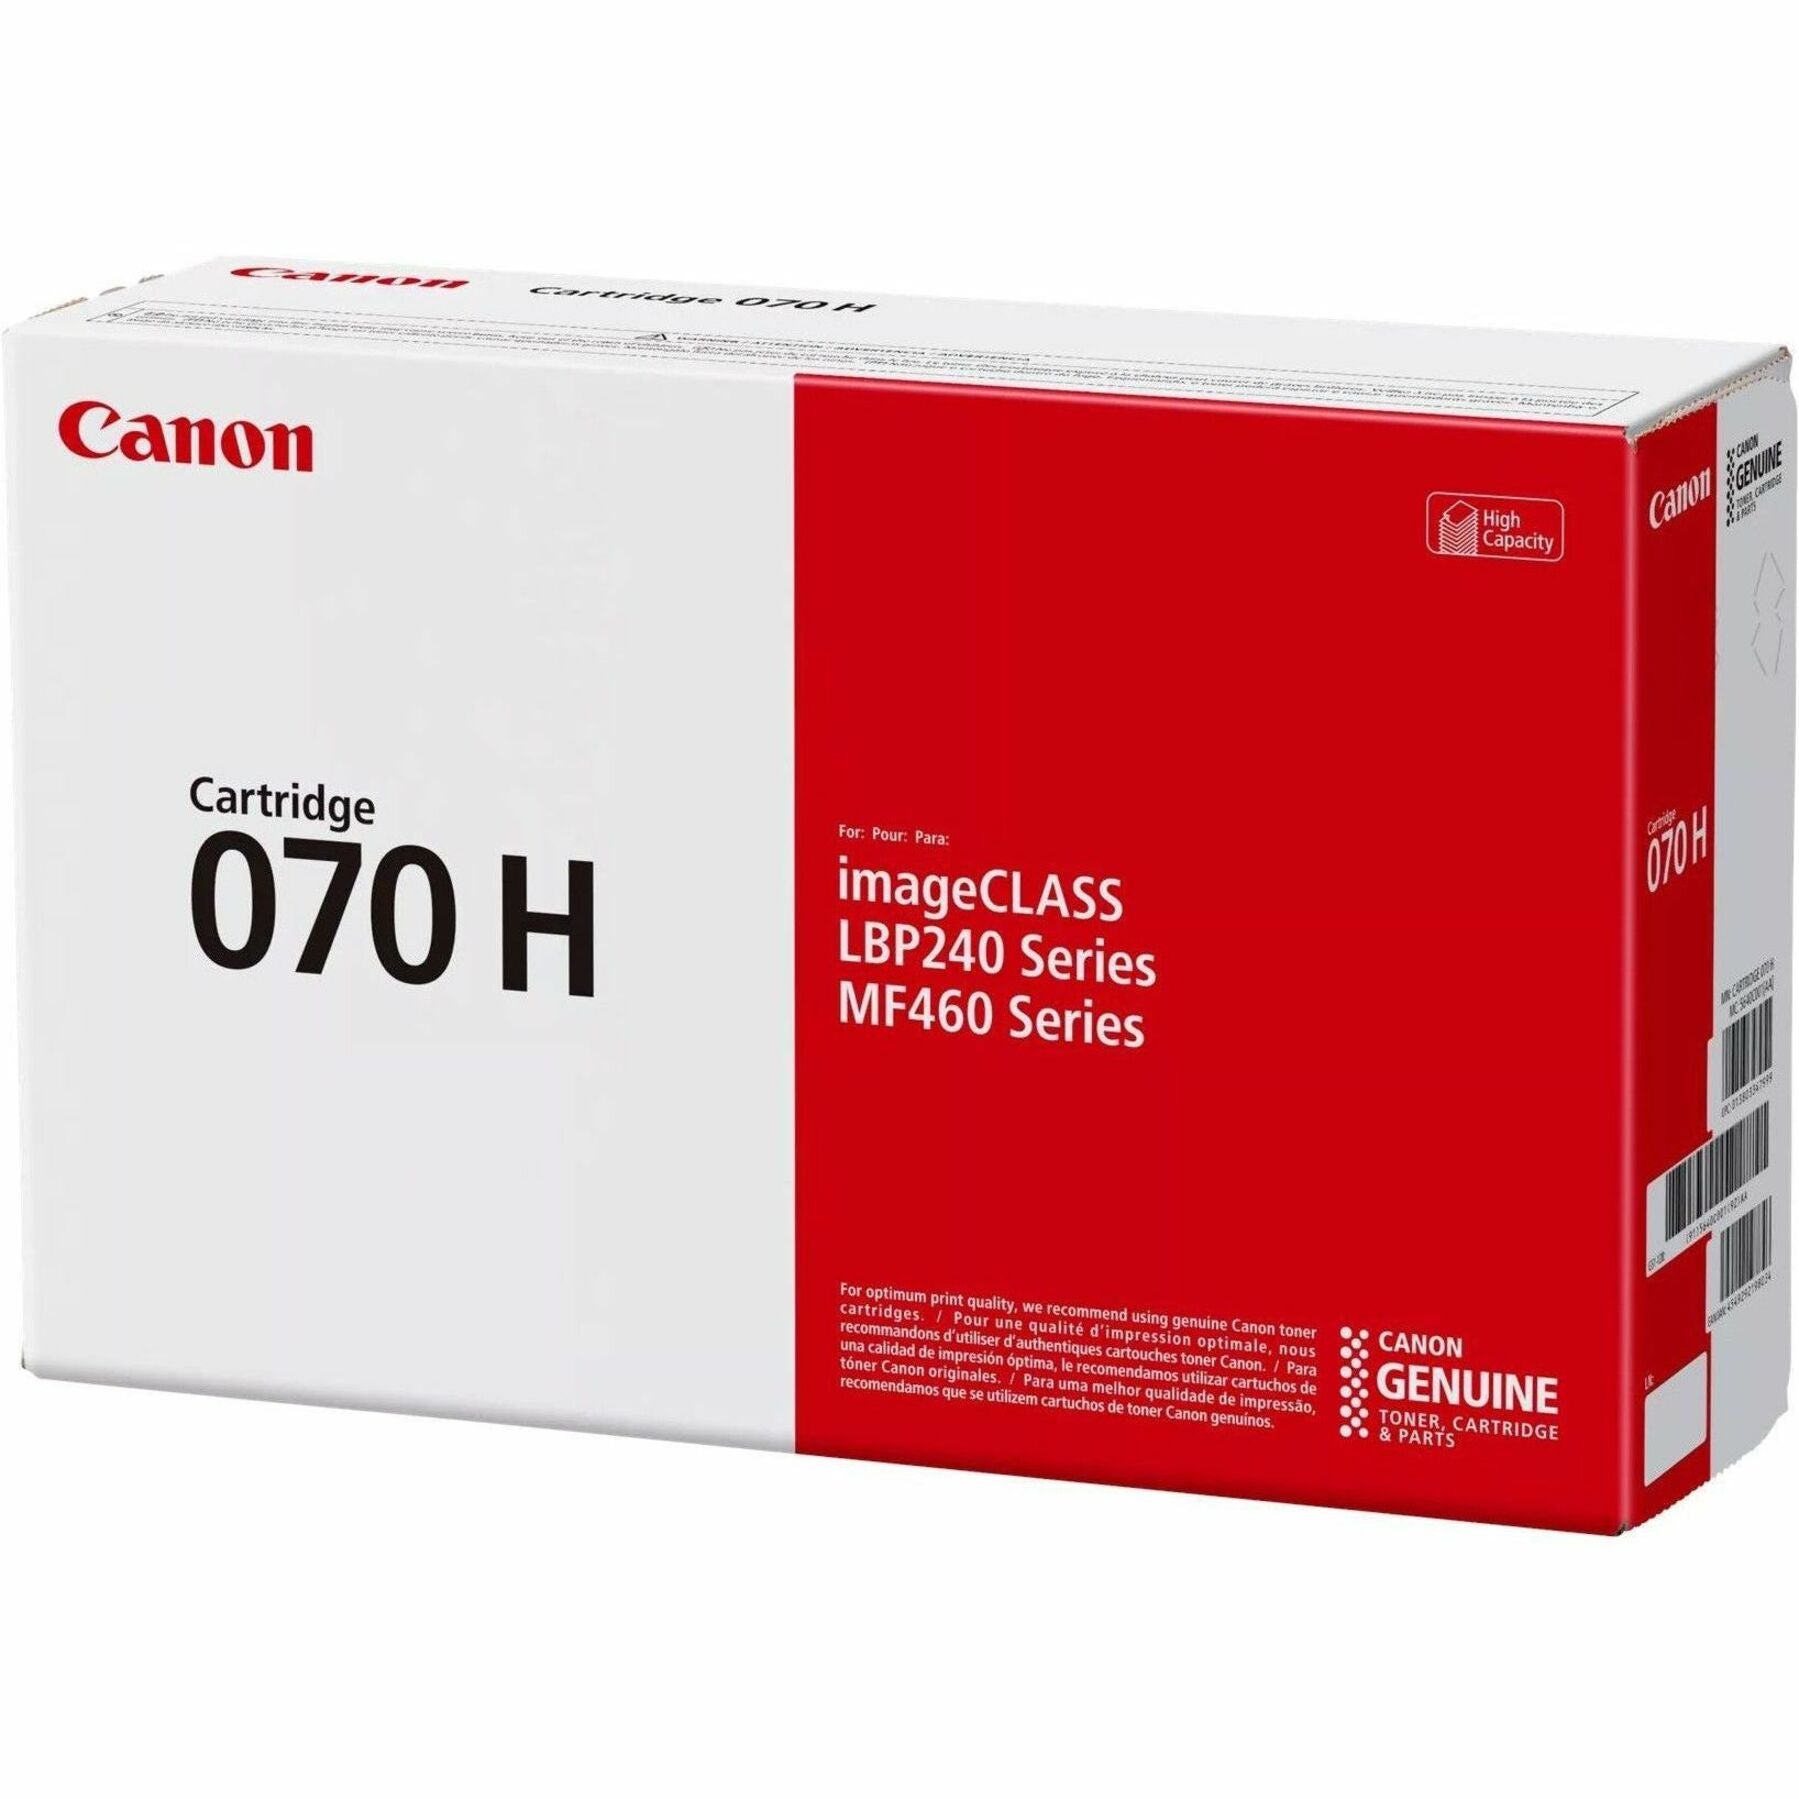 Canon 5640C001 070H Black Toner Cartridge, High Capacity - 10200 Pages